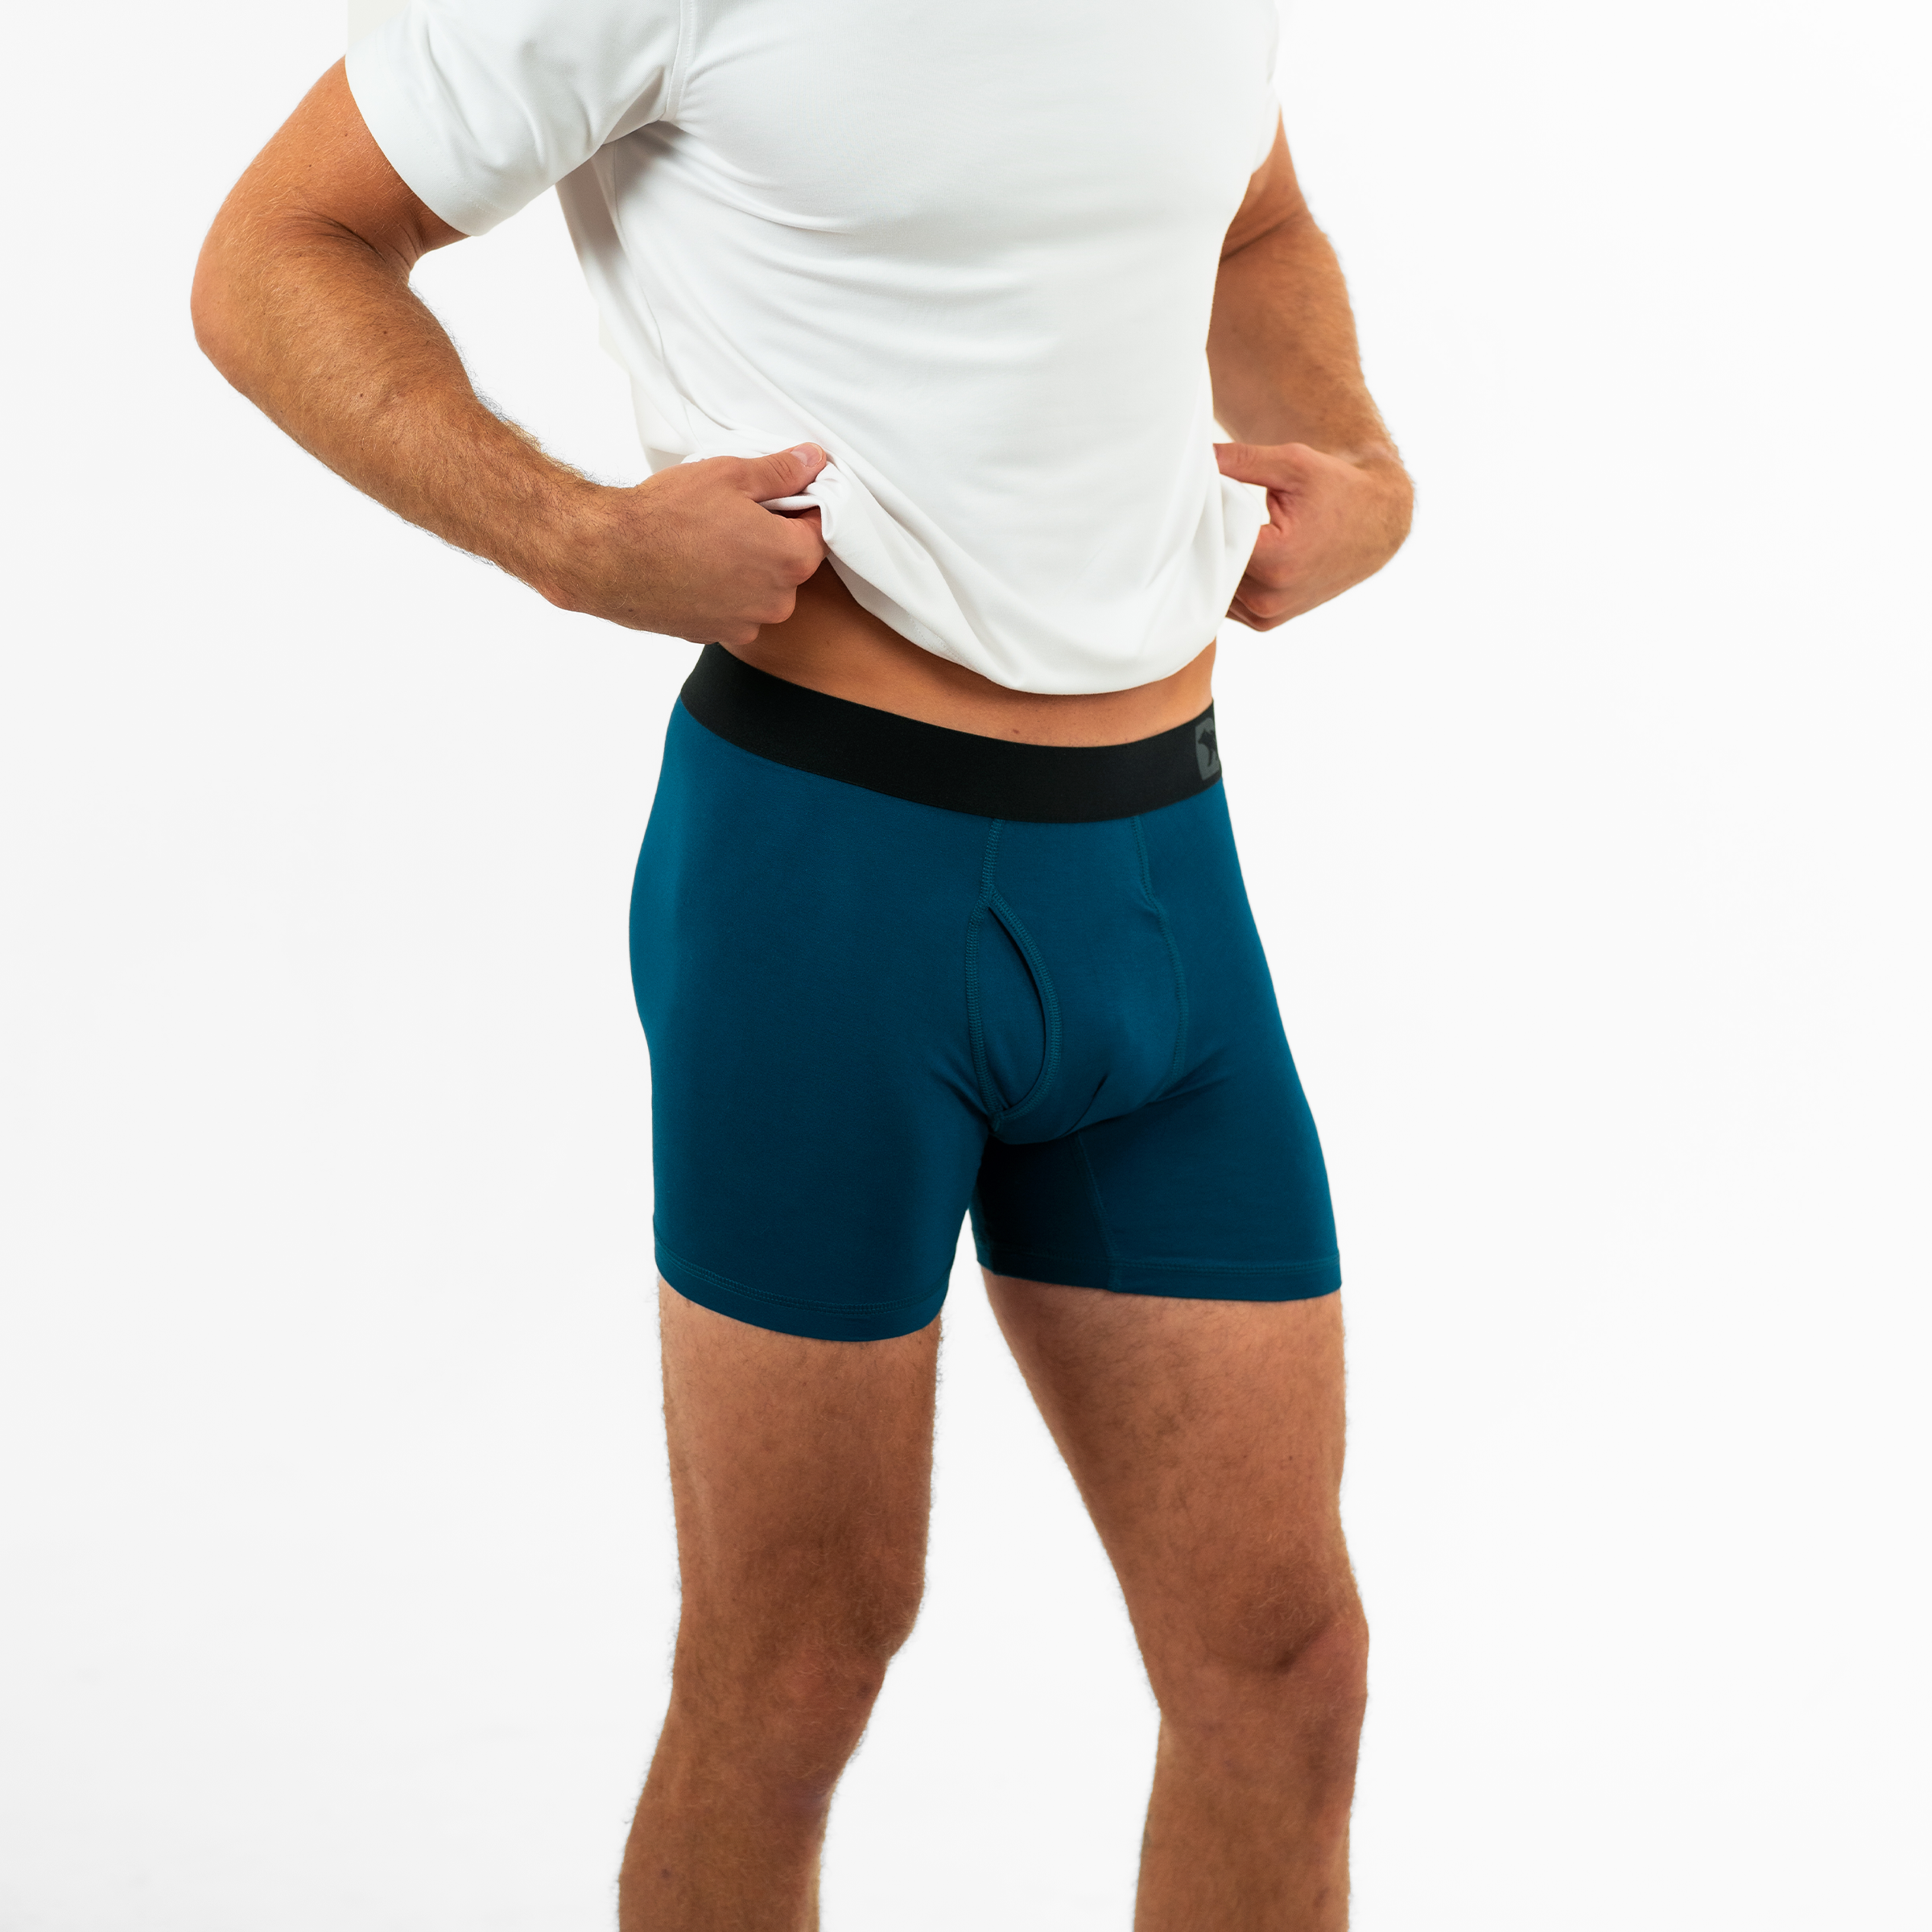 Modal Boxer Brief in Ocean blue side on model with elastic waistband with Bearbottom B logo and functional fly